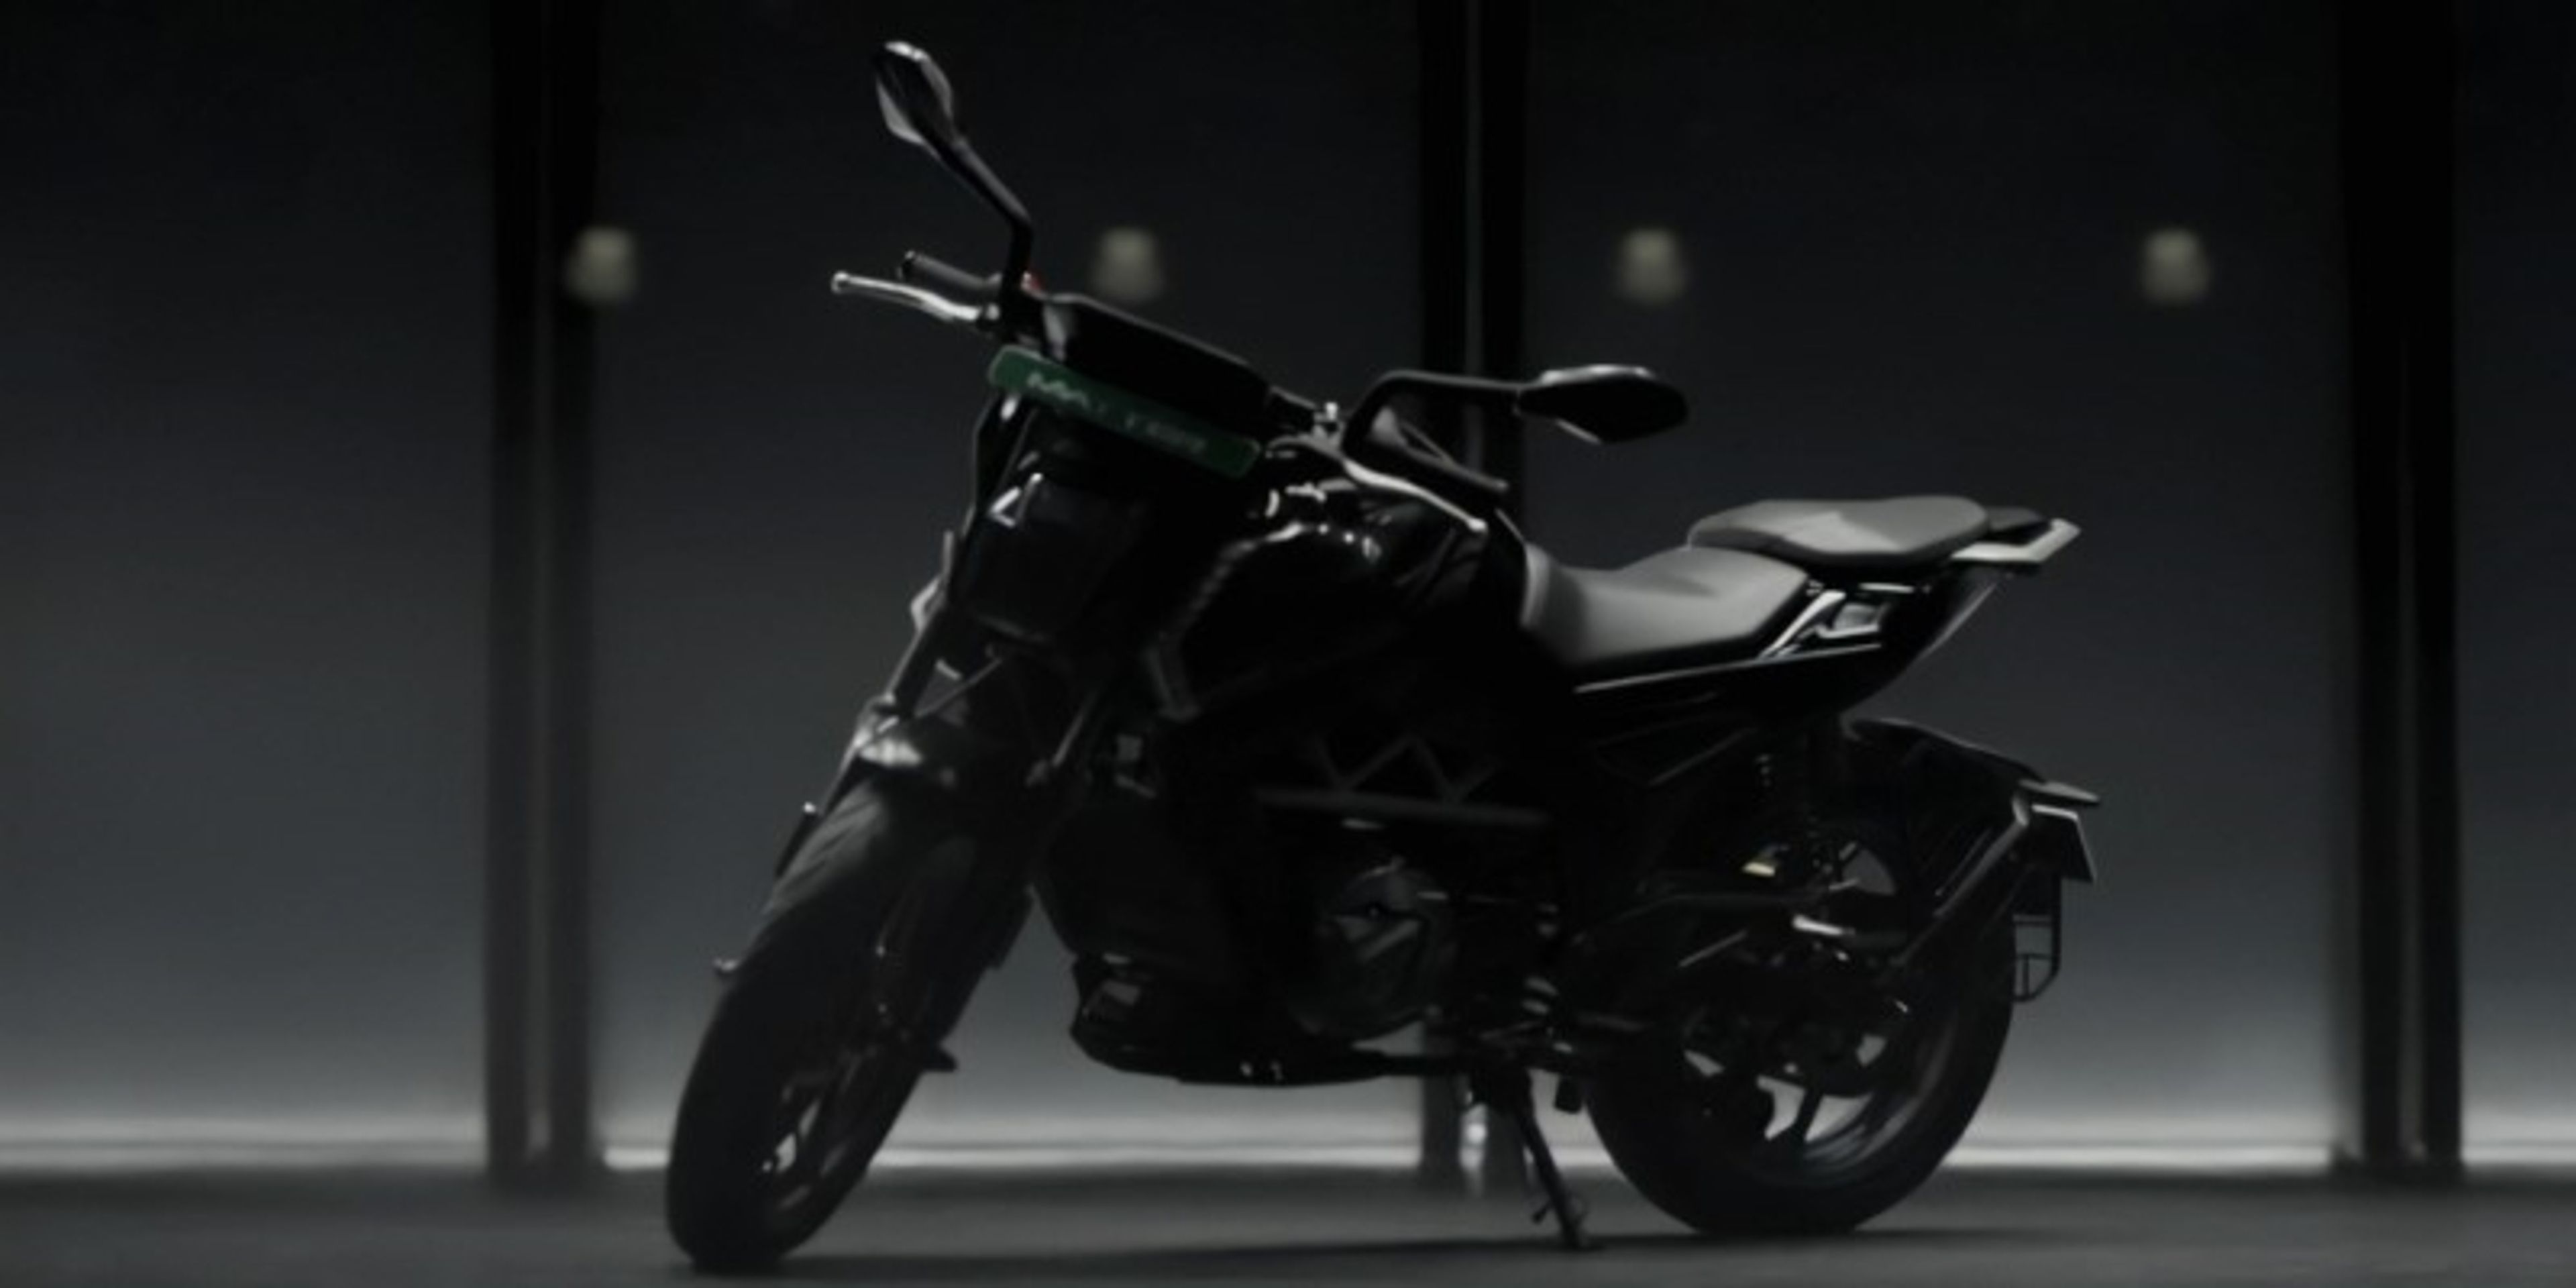 Matter launches Aera, India’s first geared electric motorcycle at Rs 1.44 lakh